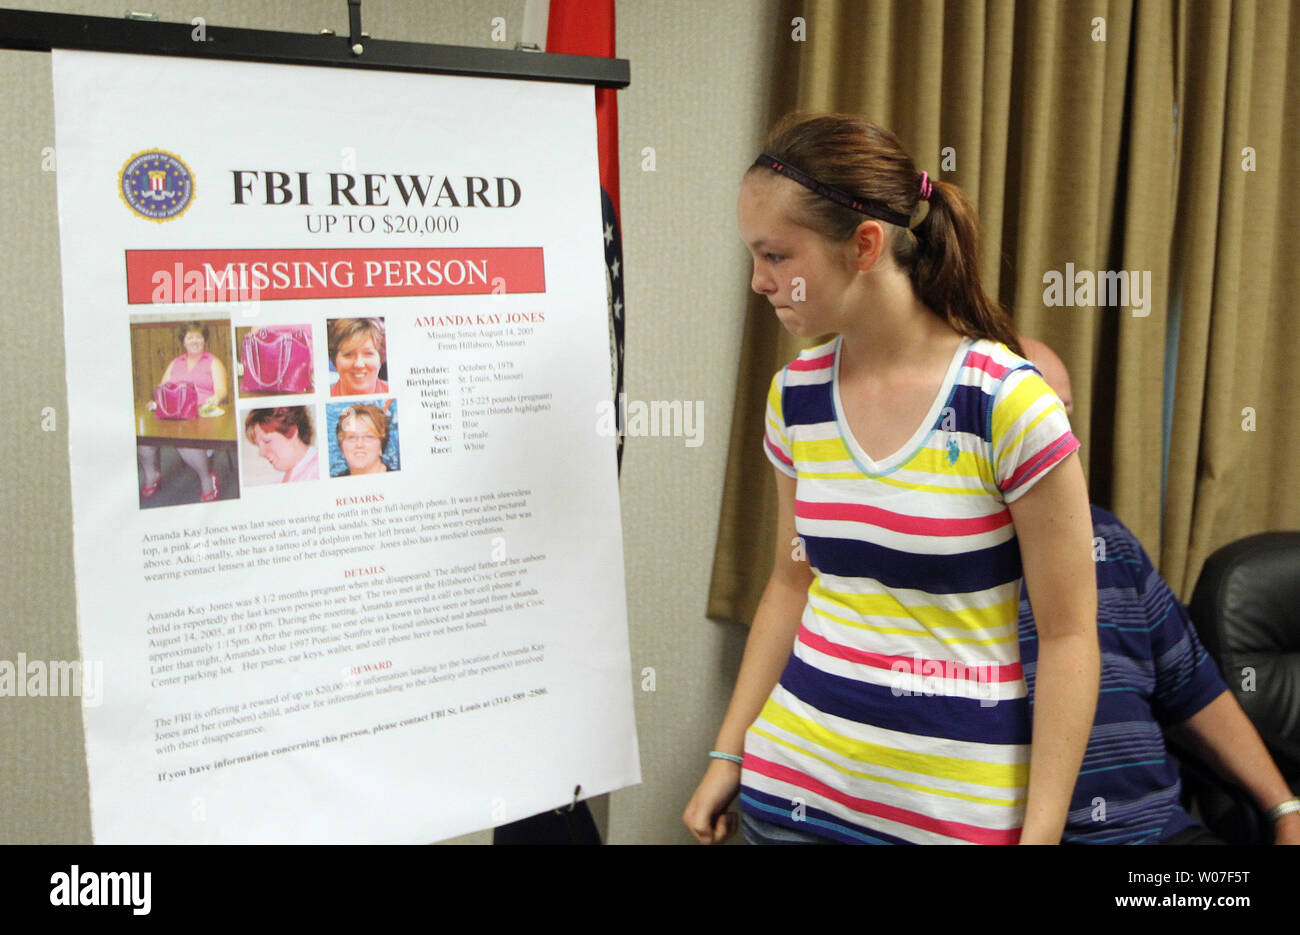 Hannah Jones (13) walks past a enlarged missing person poster of her mother Amanda Jones, following a press conference at the St. Louis headquarters of the Federal Beureau of Investigation in St. Louis on August 5, 2014. Amanda Jones went missing, 8 1/2 months pregnant from Hillsboro, Missouri on August 14, 2005 and the FBI, offering a $20,000 reward, belives it has new leads in the case.  UPI/Bill Greenblatt Stock Photo